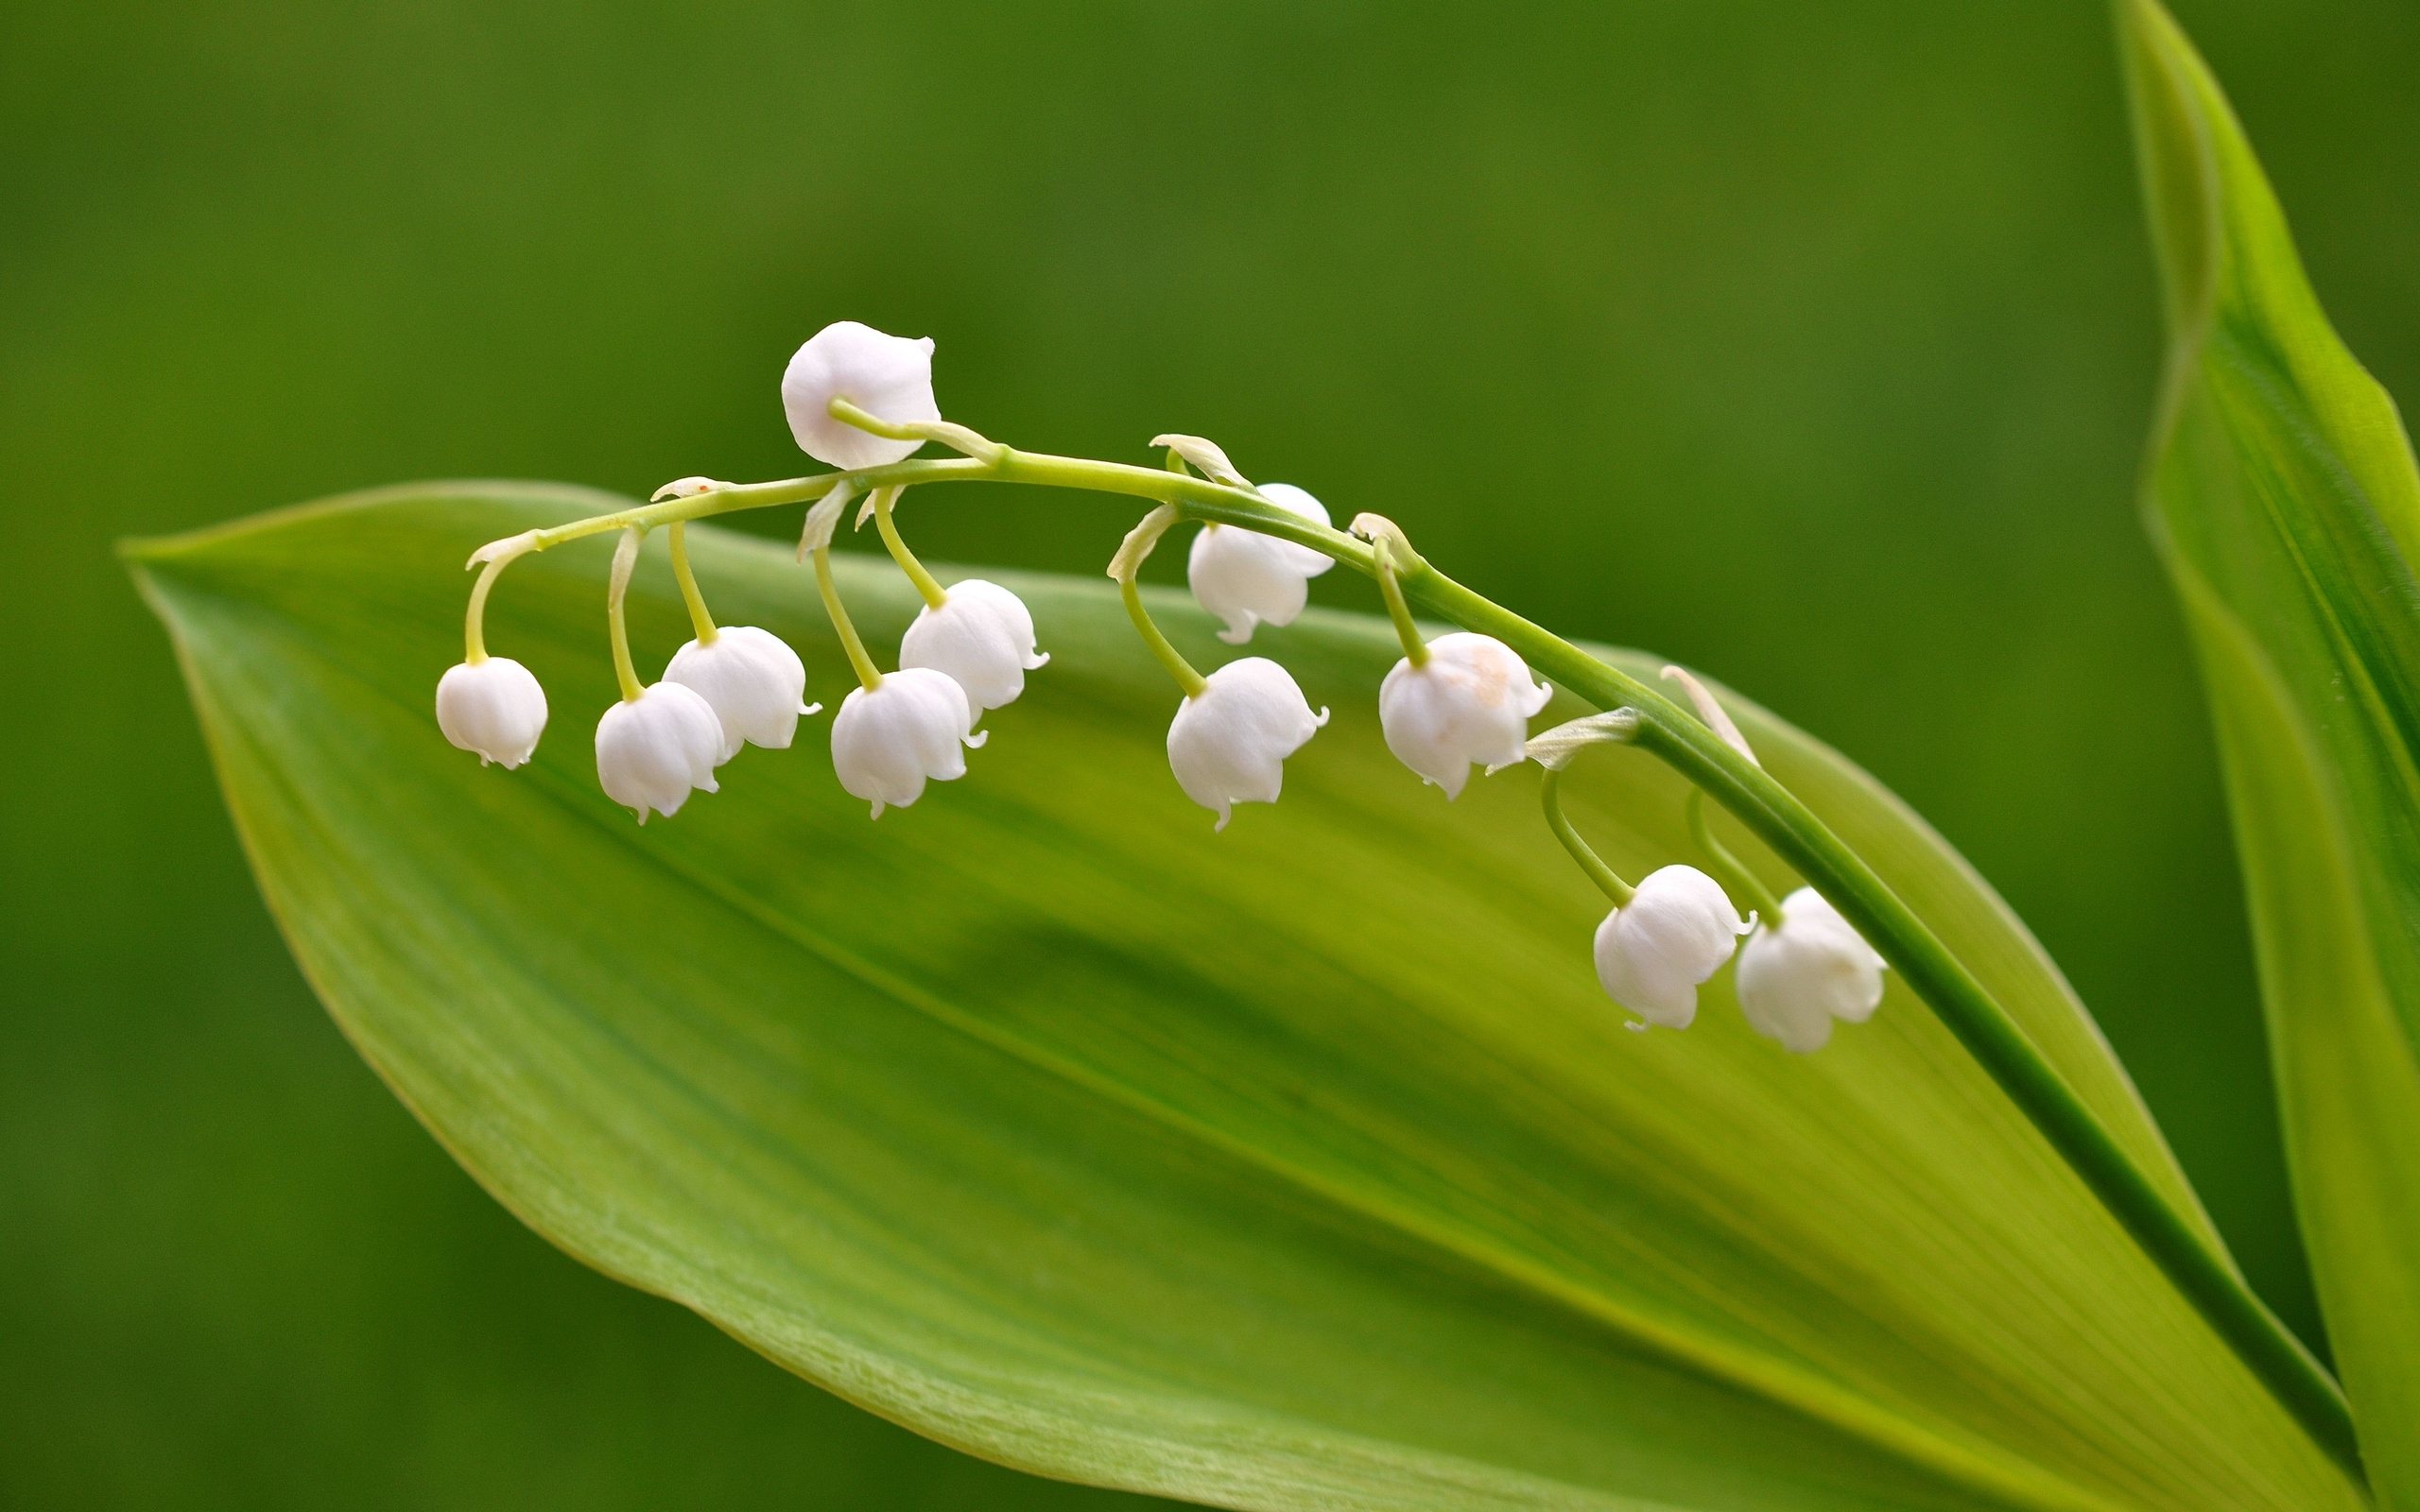 [63+] Lily Of The Valley Wallpaper on WallpaperSafari